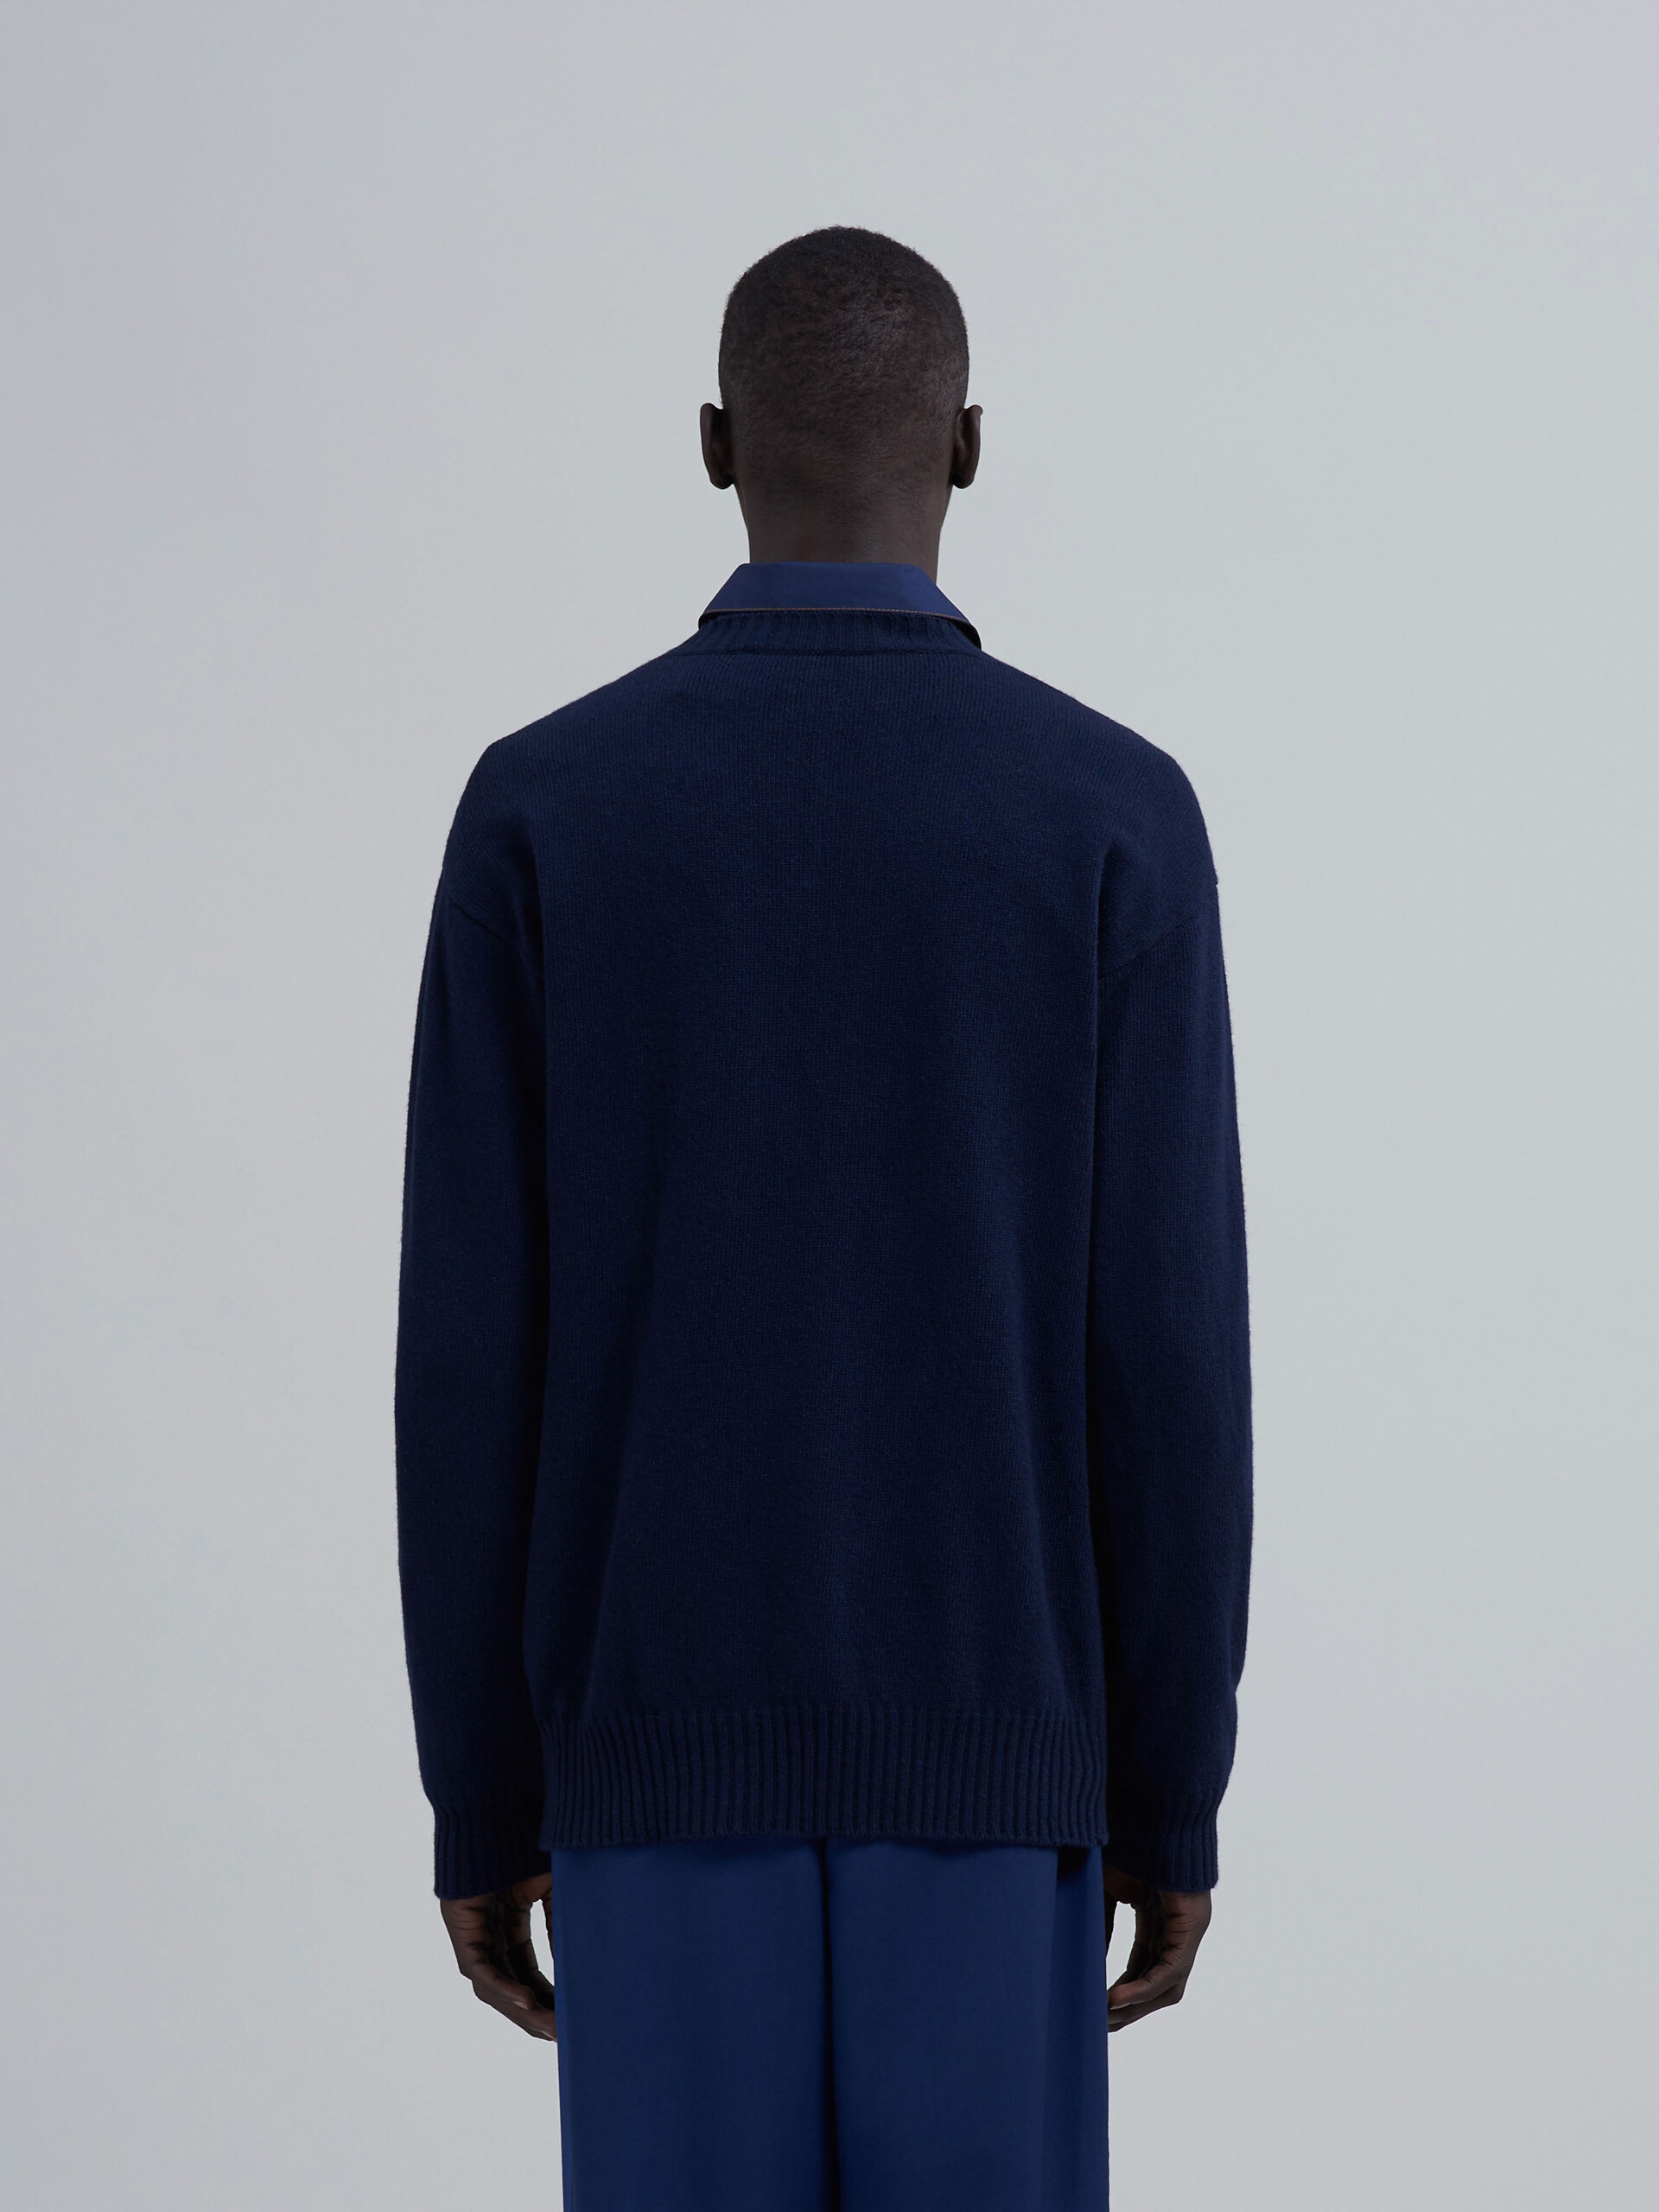 Blue black cashmere sweater - Pullovers - Image 3